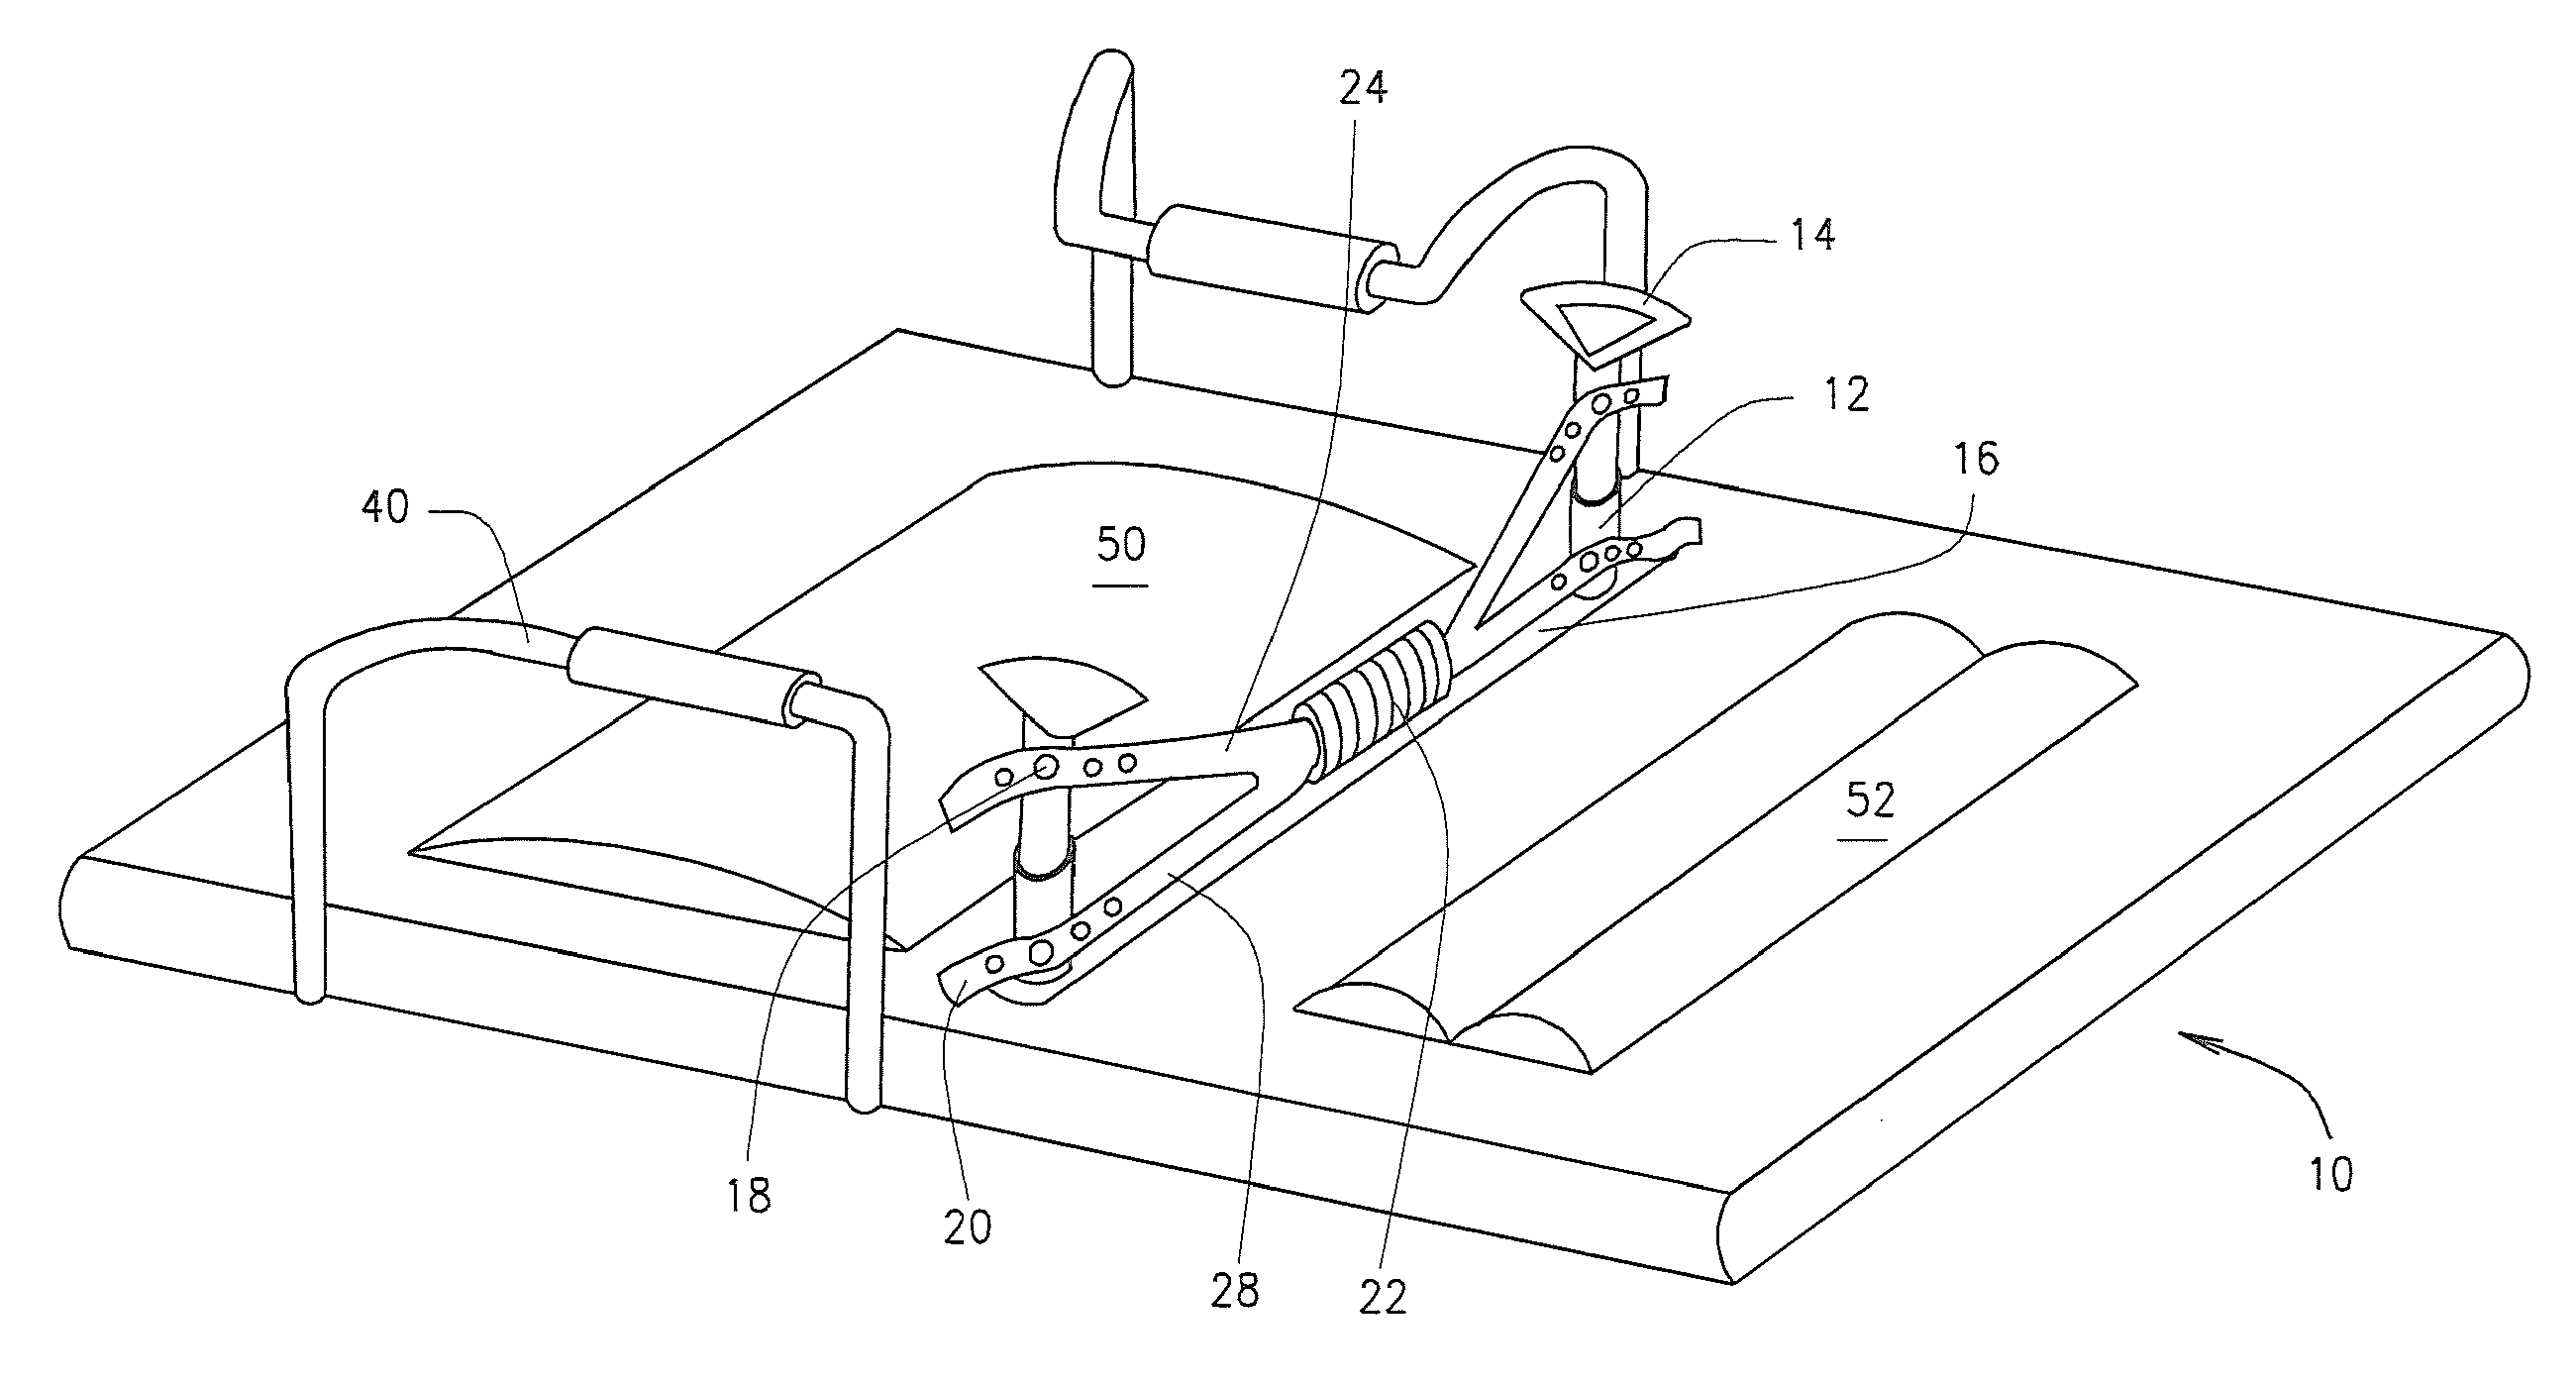 Apparatus and method for airway patency and head immobilization